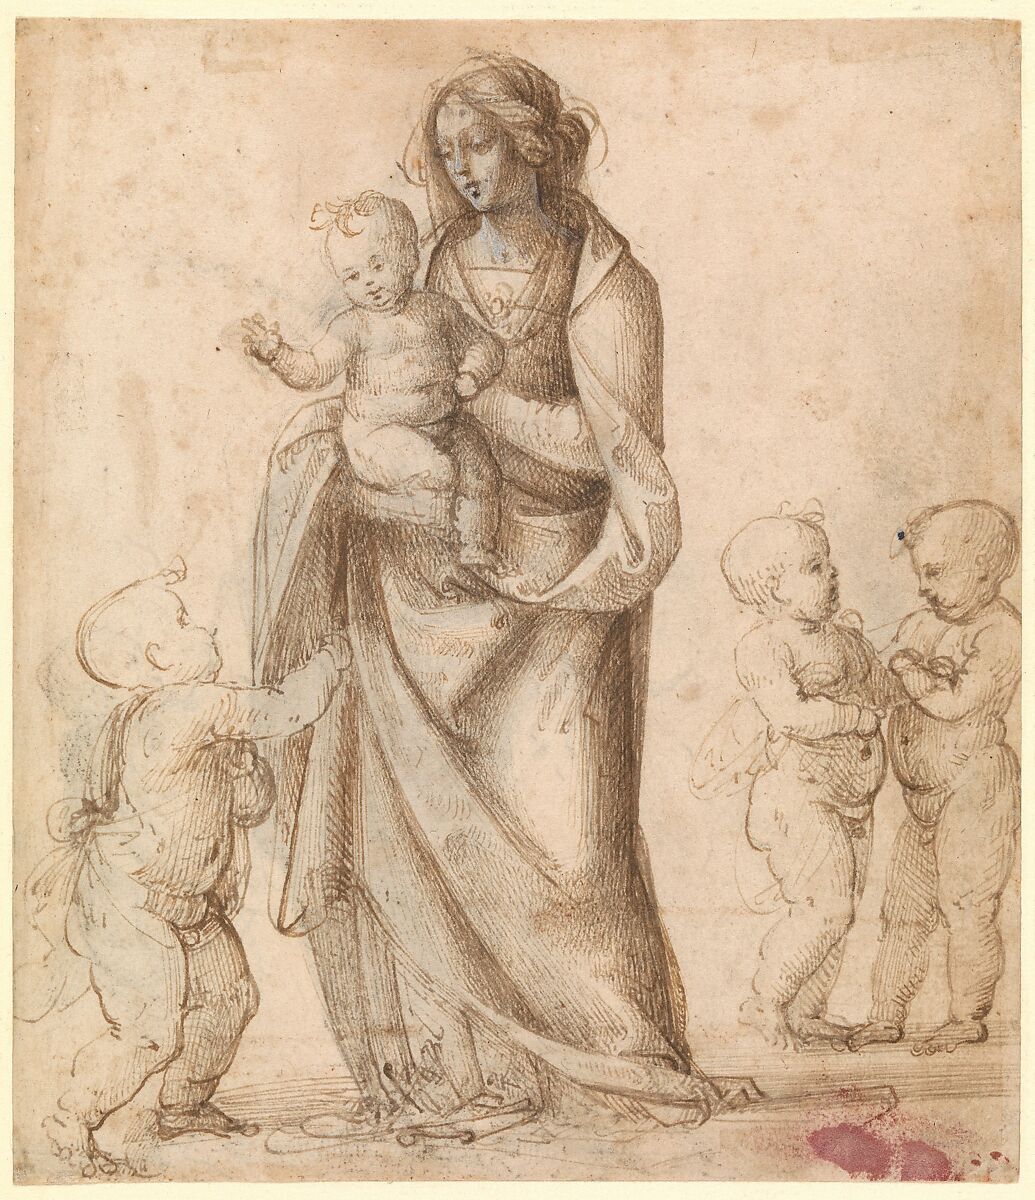 Madonna and Child with the Infant Saint John the Baptist and Two Putti (recto); Madonna and Child with the Infant Saint John the Baptist and a Putto (verso), Fra Bartolomeo (Bartolomeo di Paolo del Fattorino)  Italian, Pen and brown ink, touches of brown wash, heightened with white (partly oxidized), over traces of black chalk, on tinted paper; partial tracing of figures from the verso (recto); Pen and brown ink over black chalk (verso)